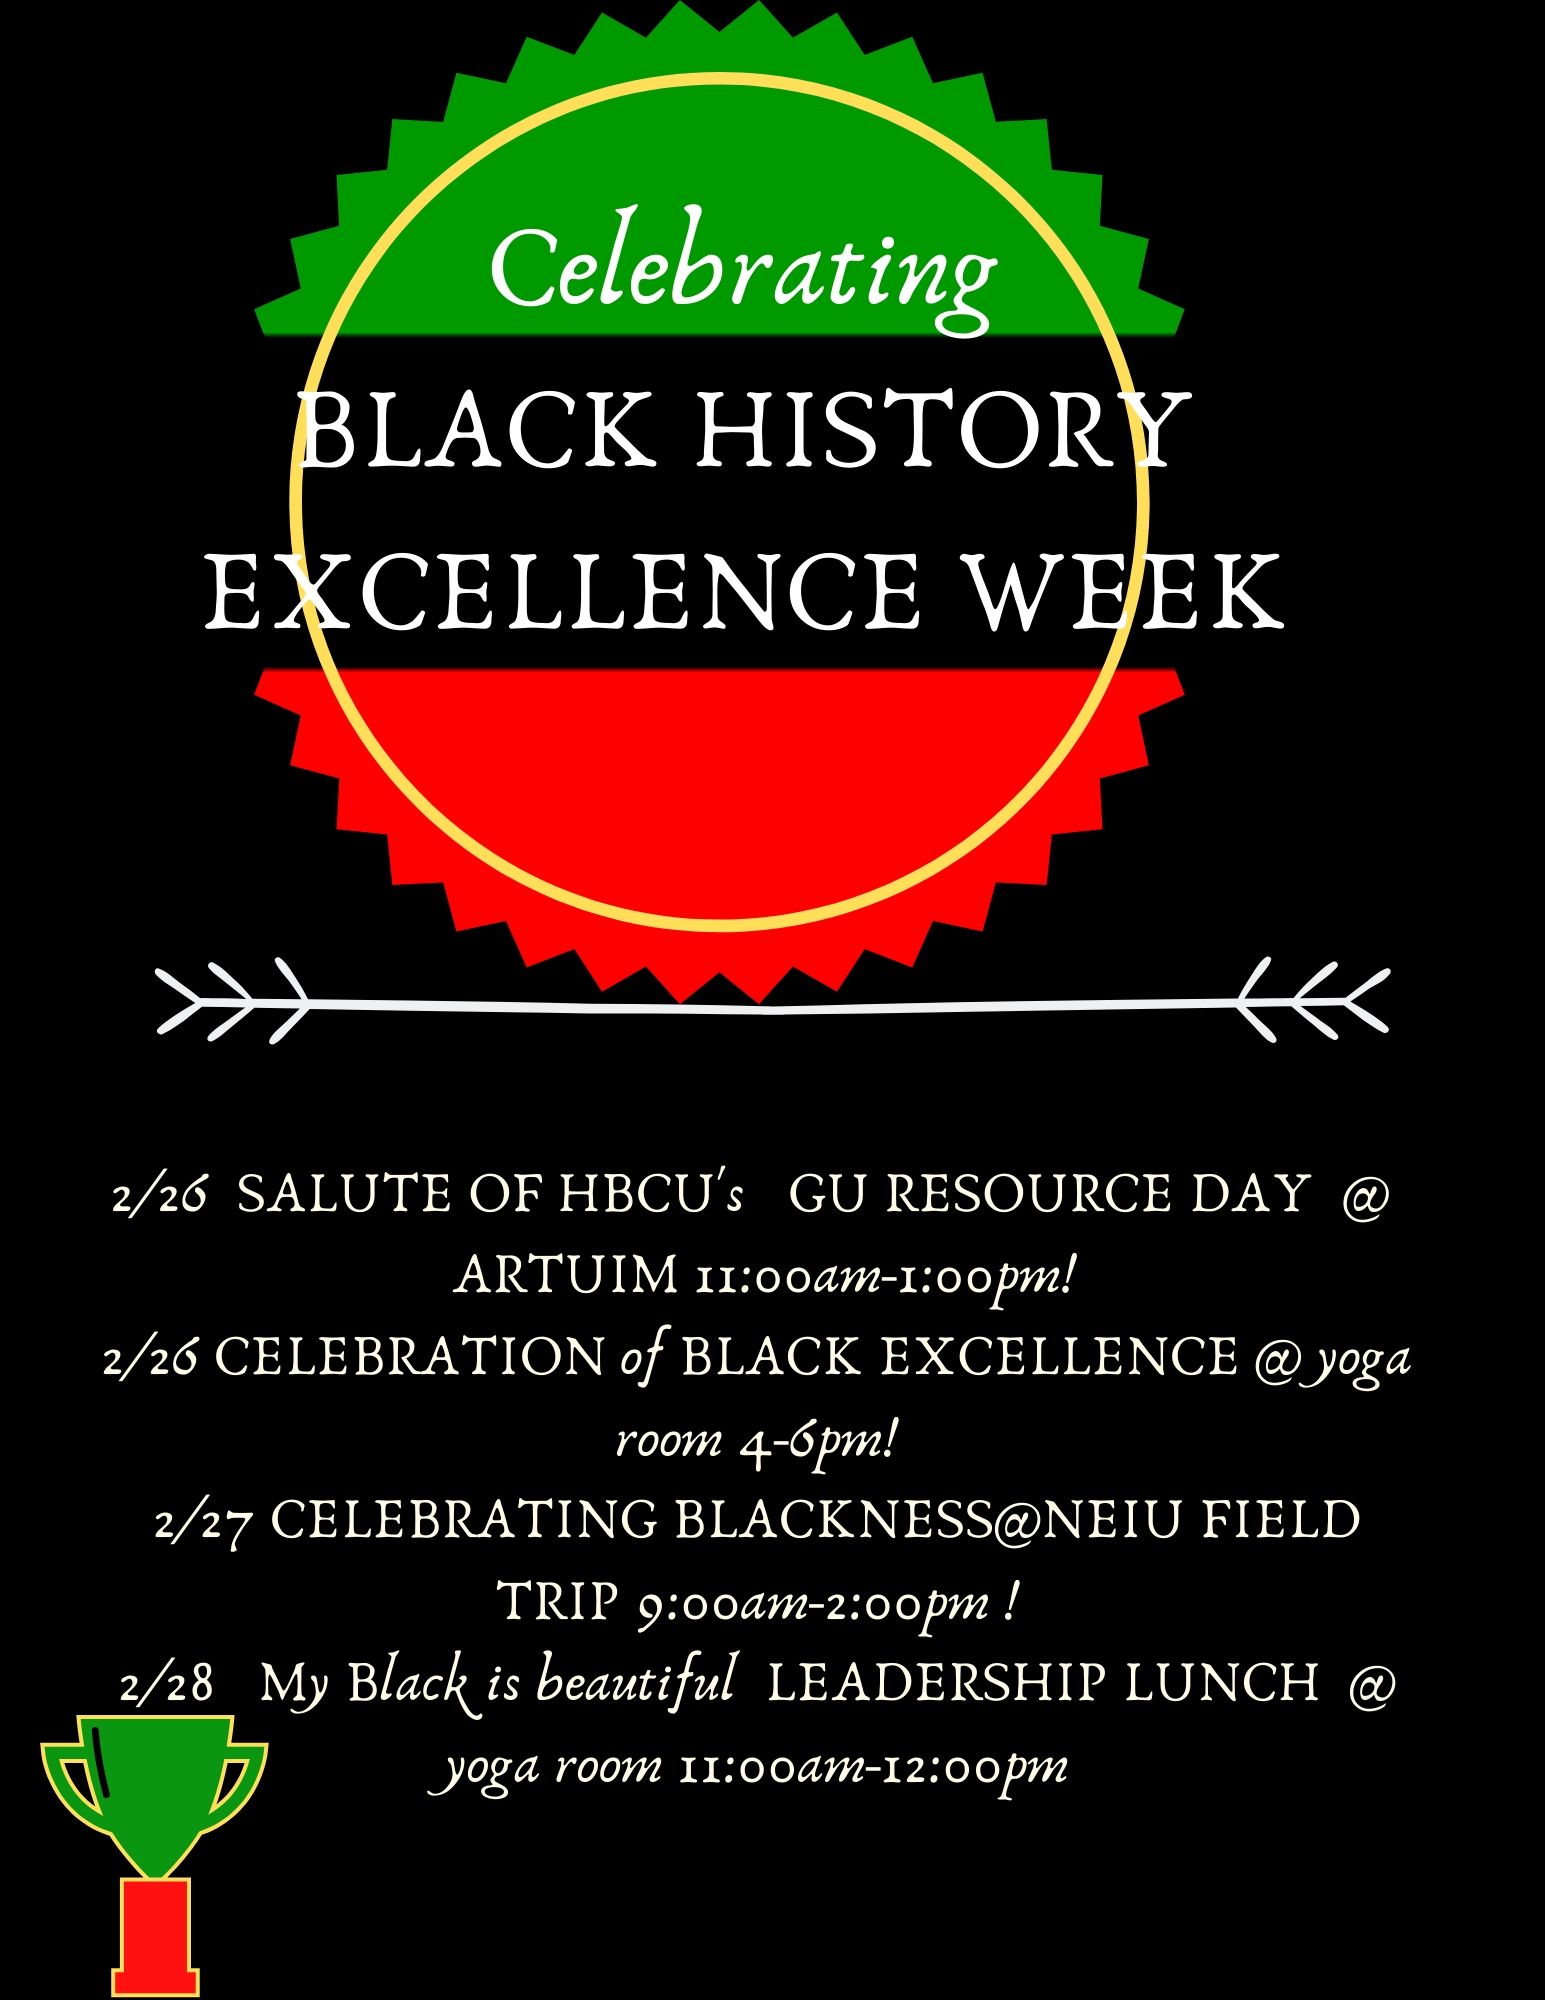 Celebration of black excellence in honor of Black History Month